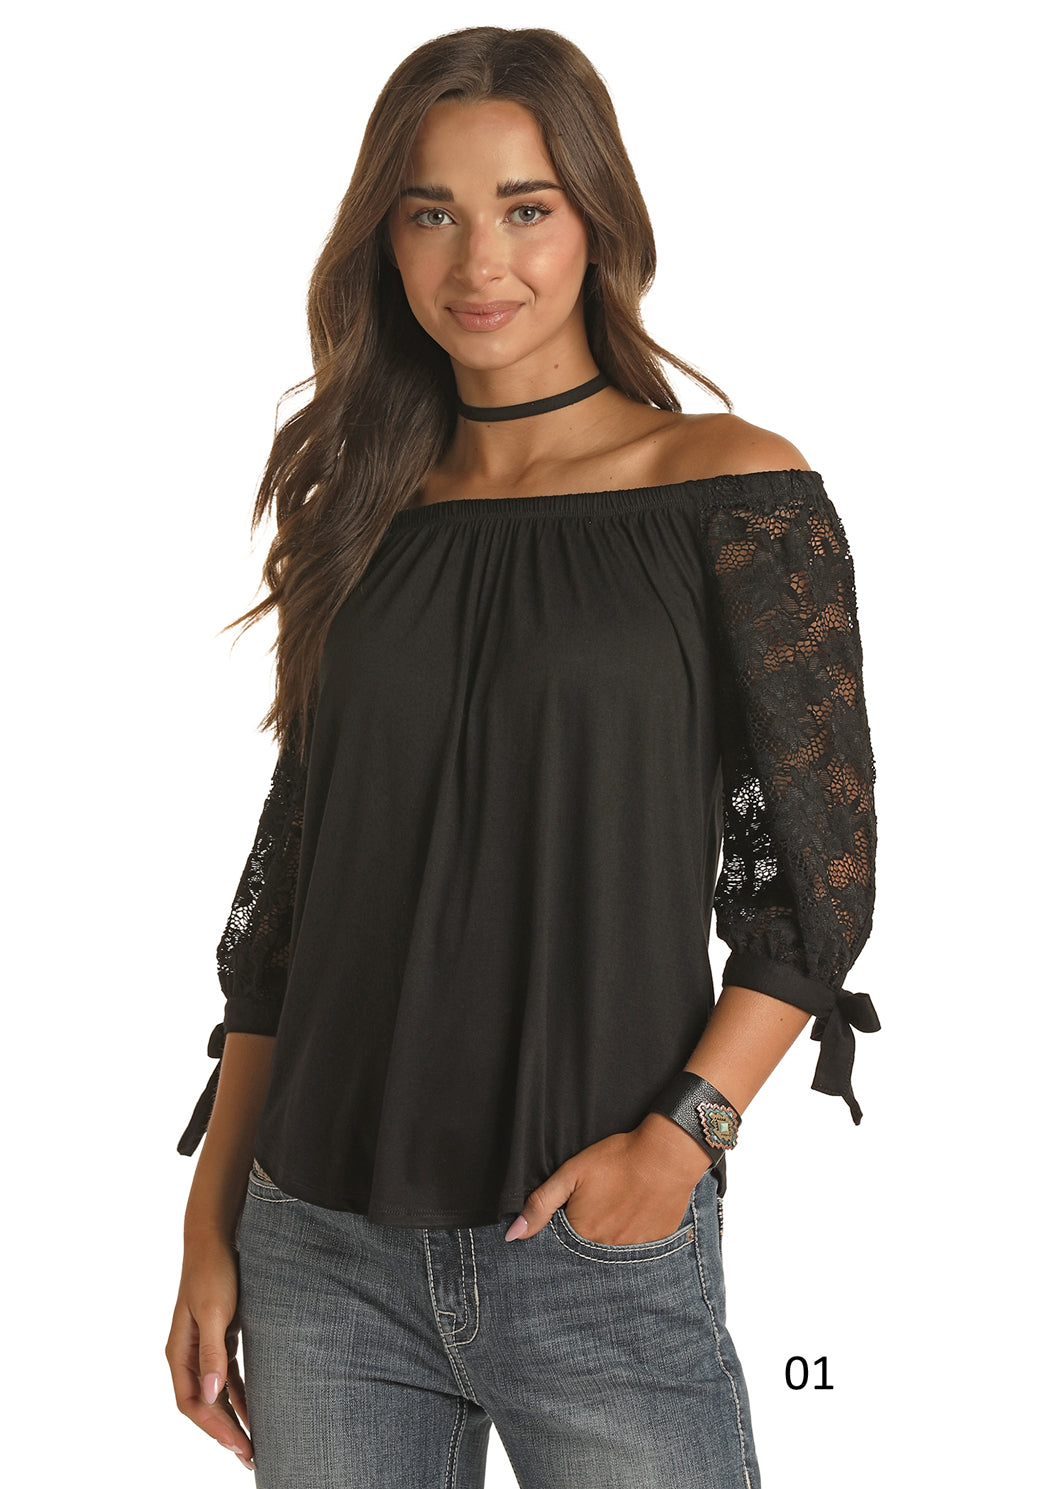 PANHANDLE OFF THE SHOULDER LACE TRIM TOP